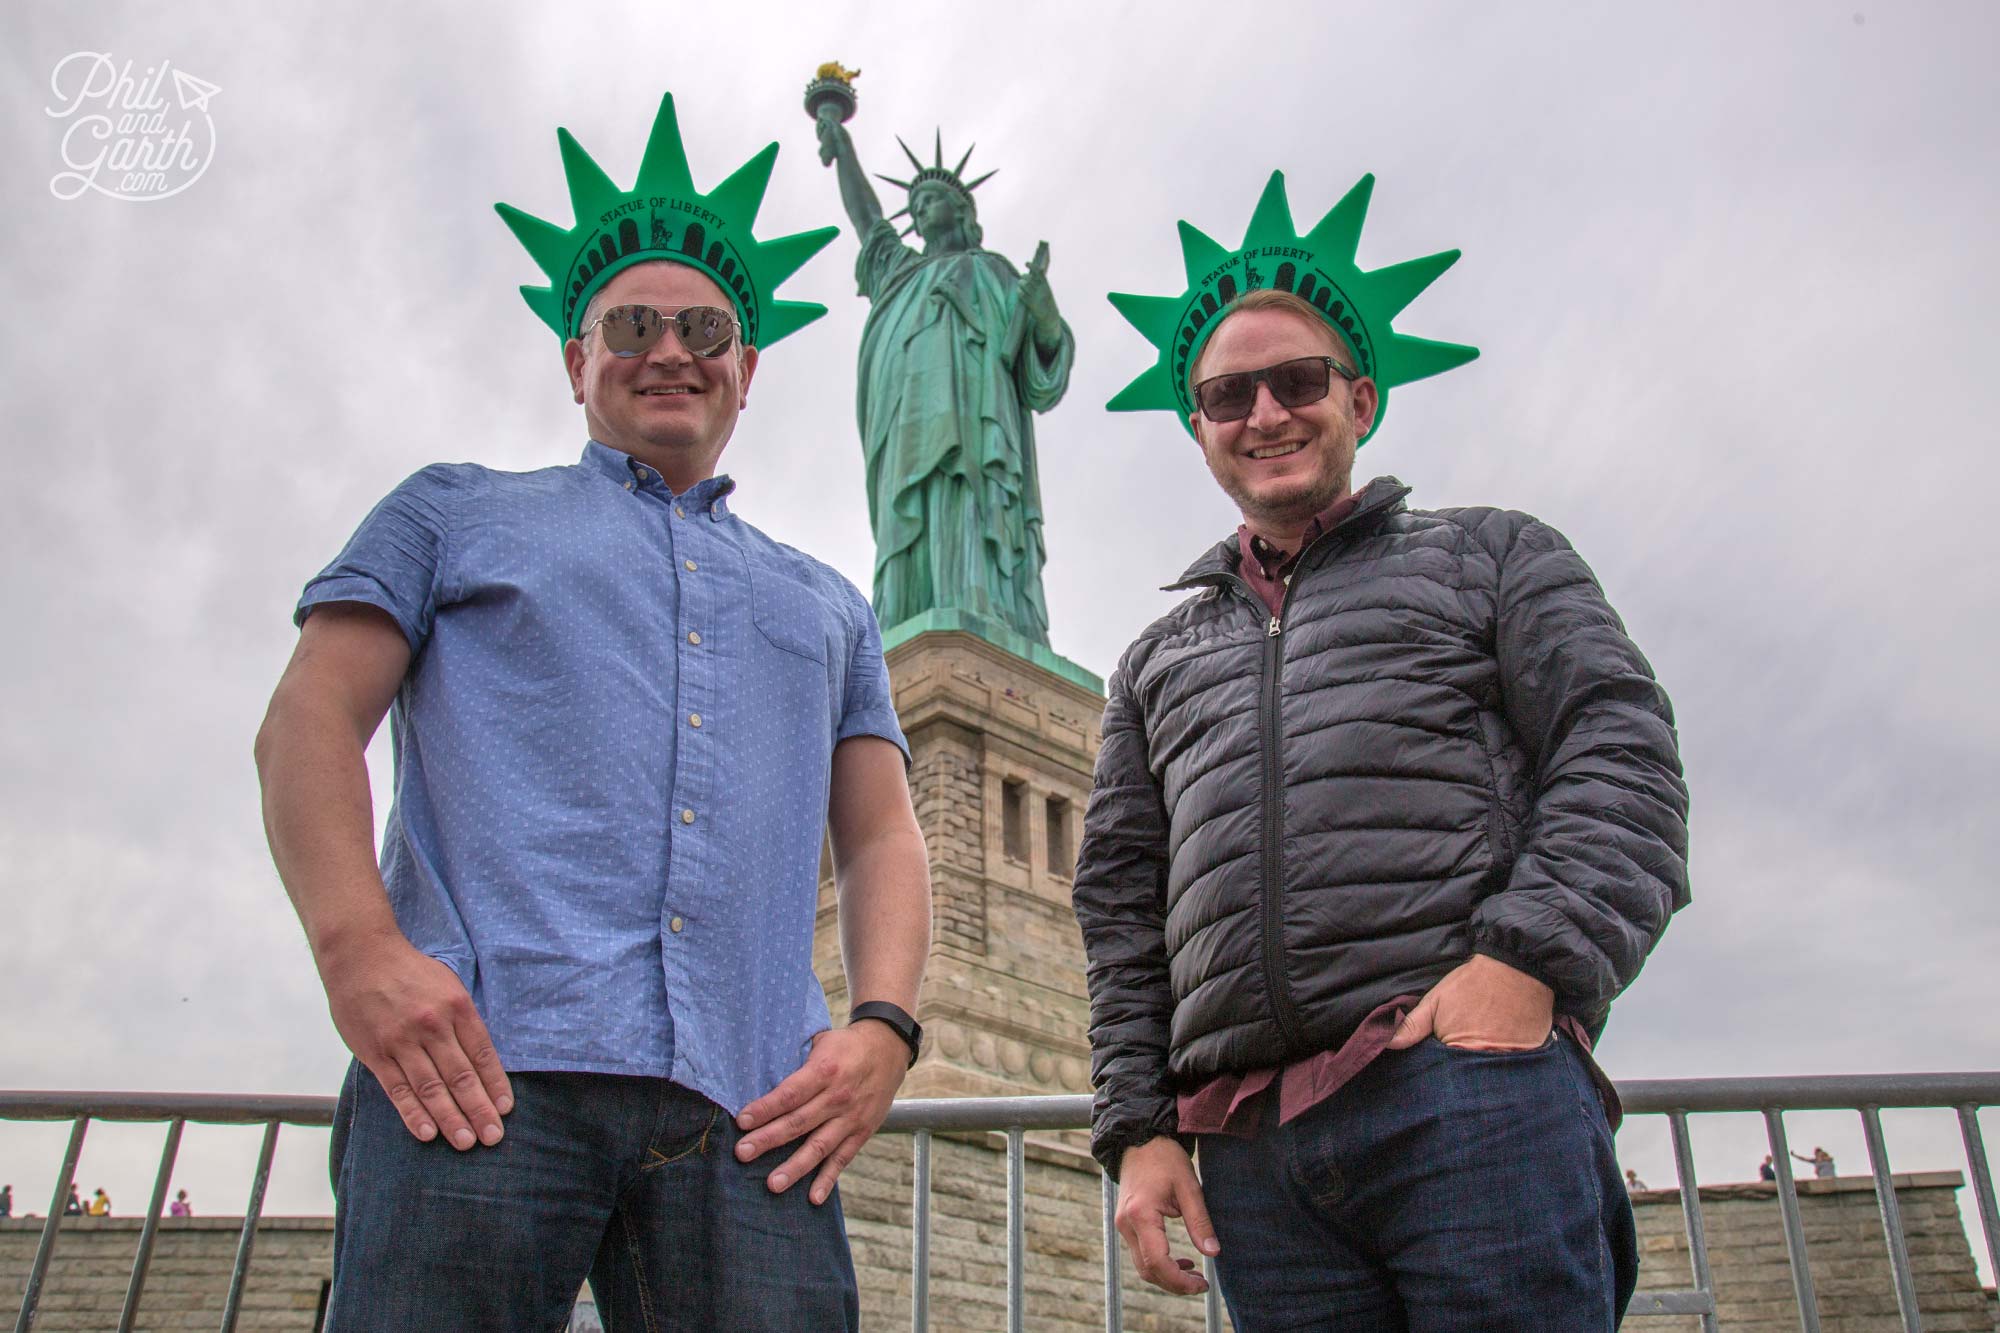 Phil and Garth with Lady Liberty